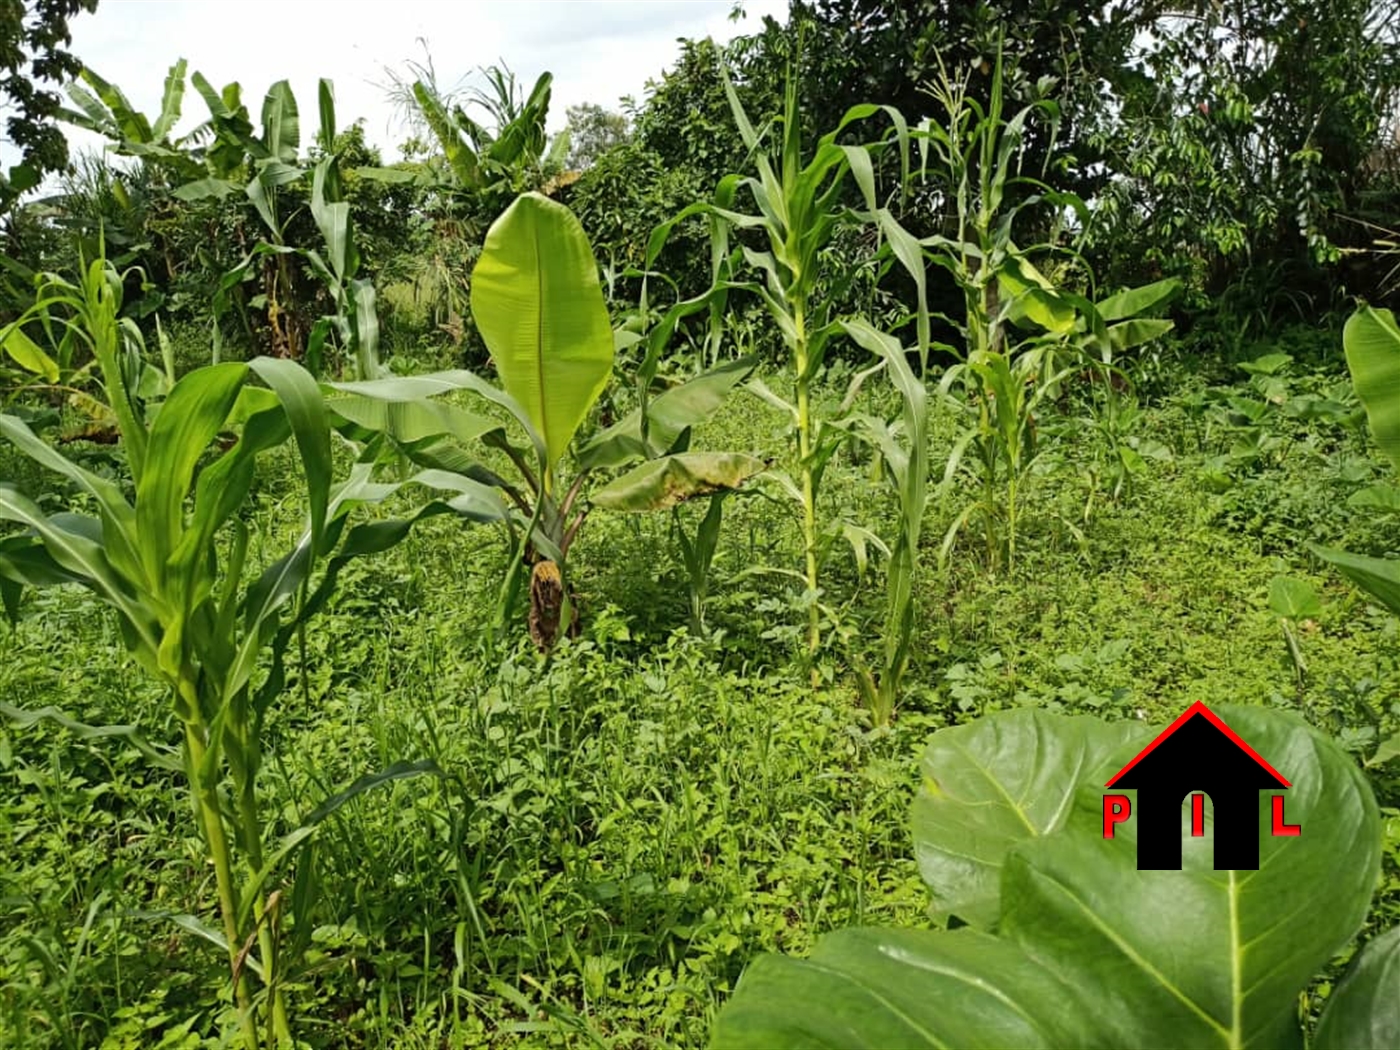 Agricultural Land for sale in Nkozi Masaka